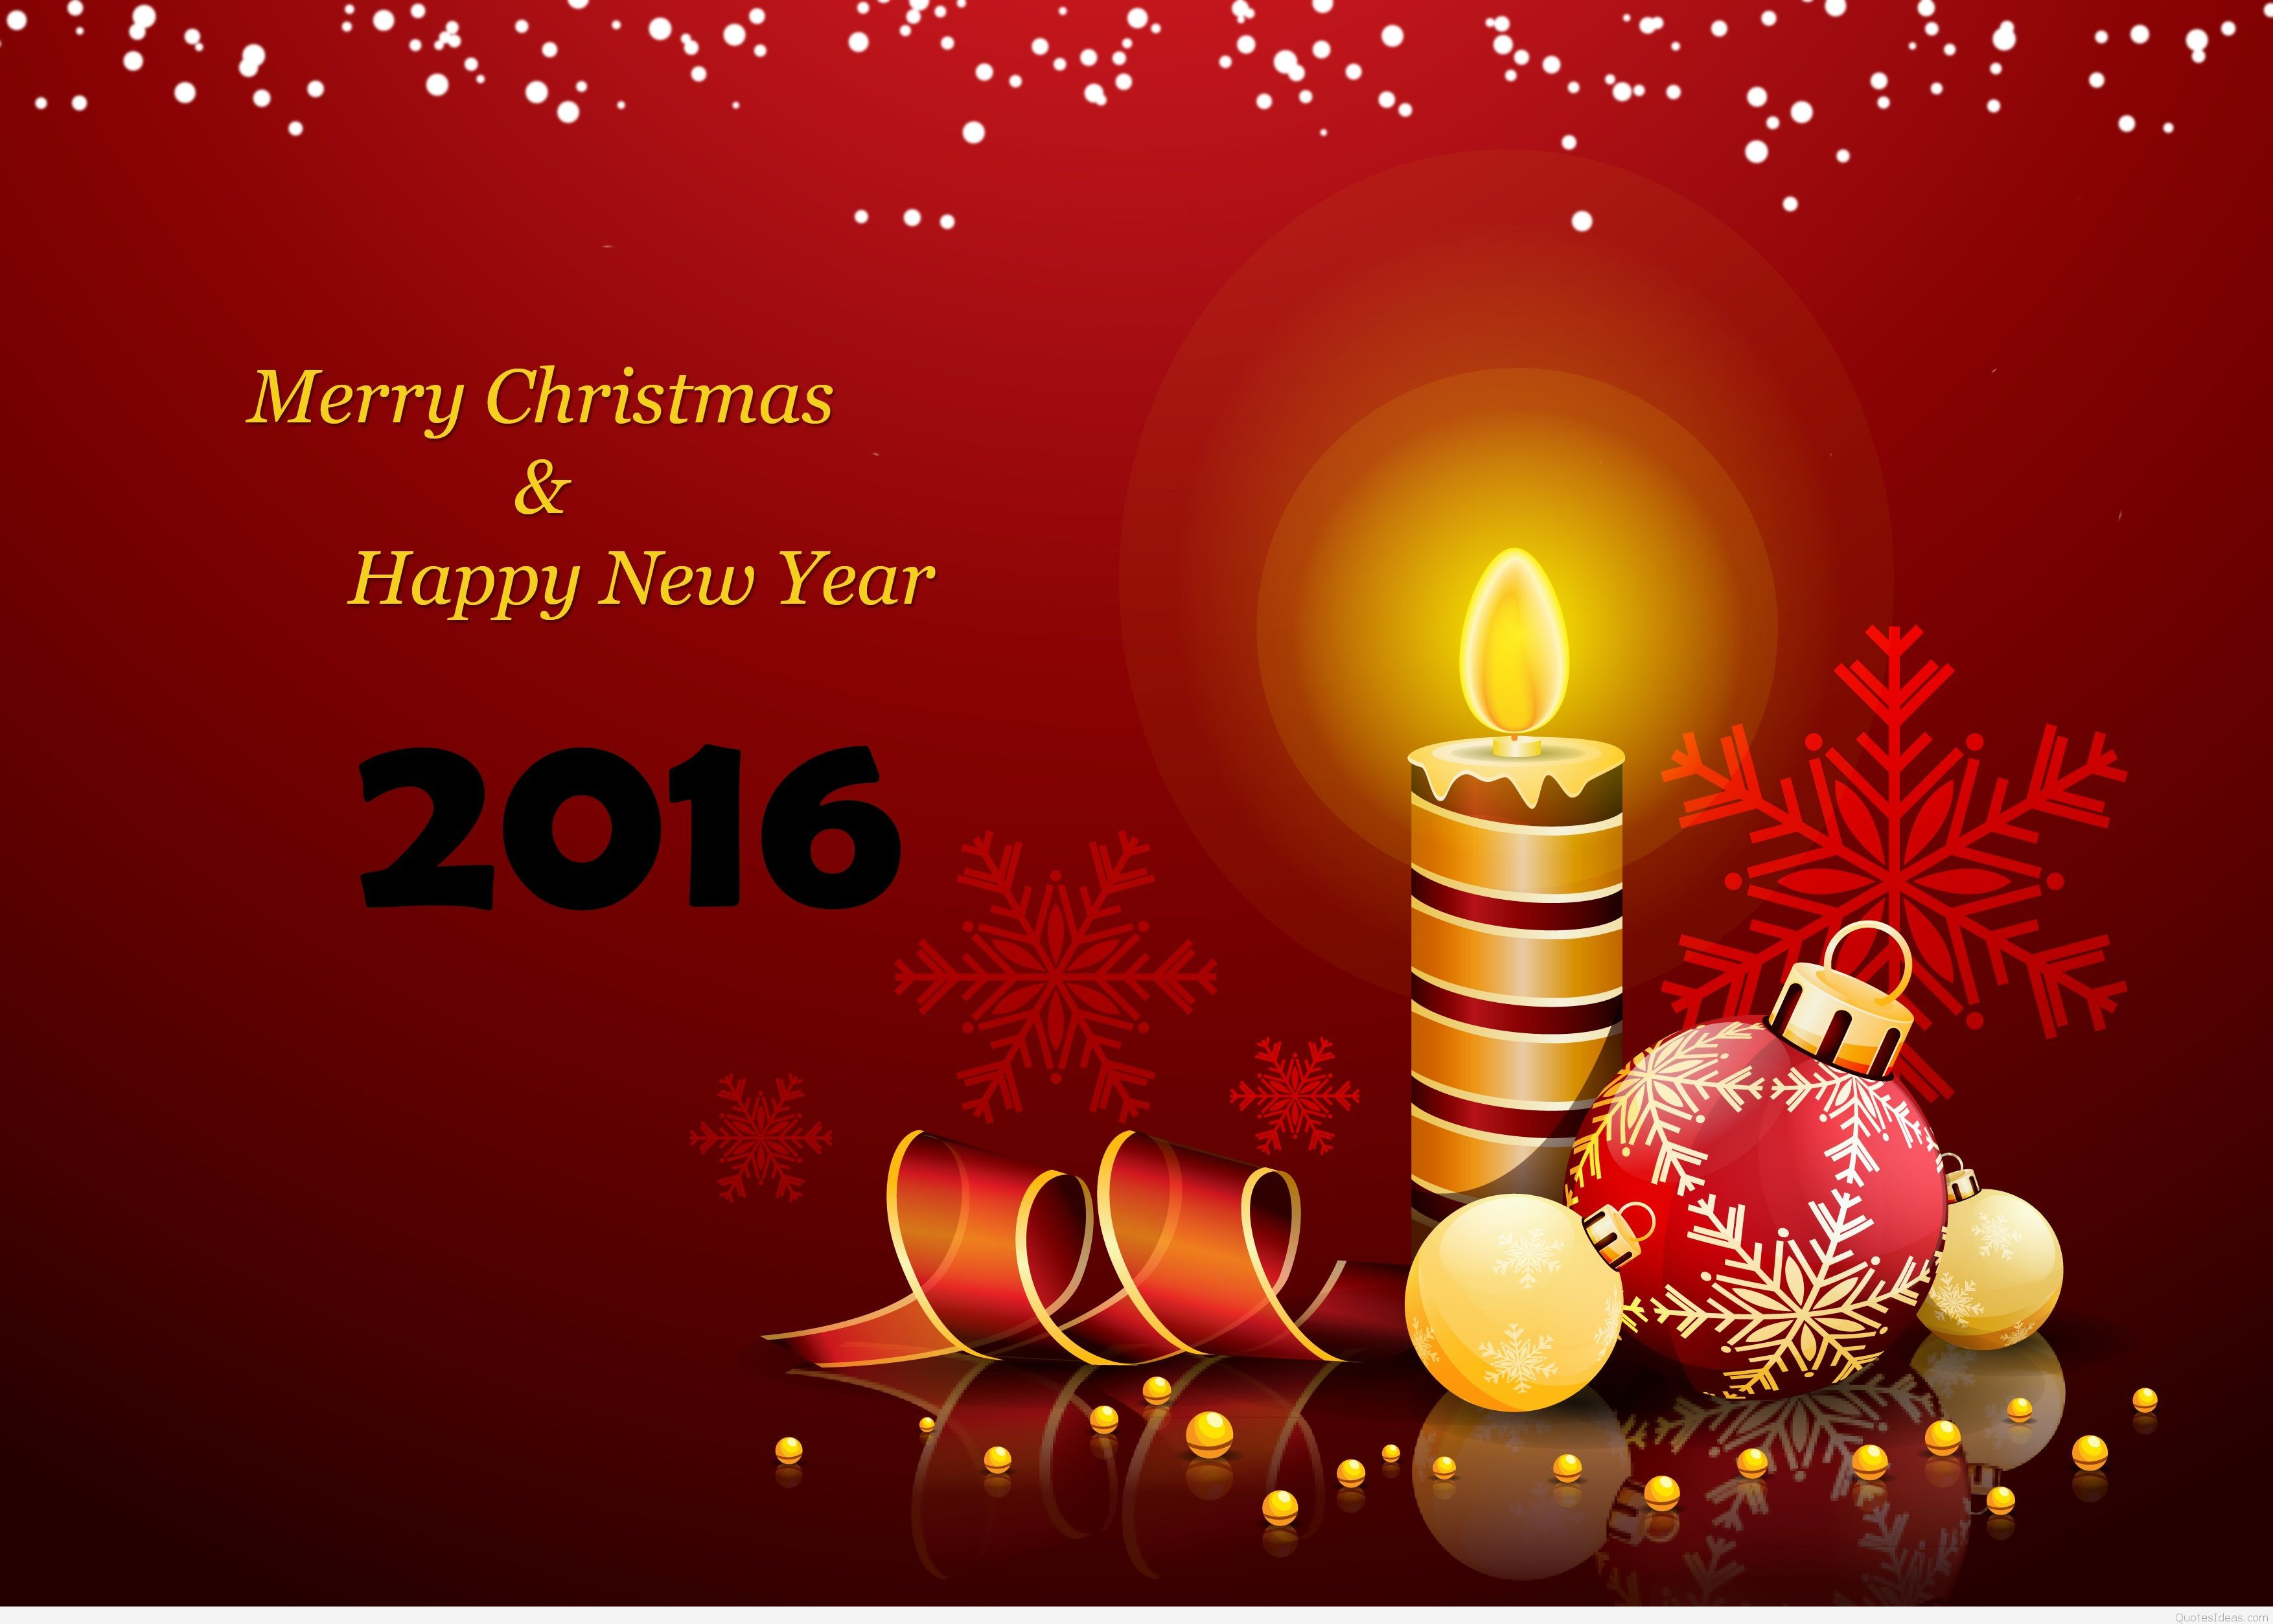 Christmas And New Year Quotes
 A merry Christmas and a Happy new year wishes sayings 2016